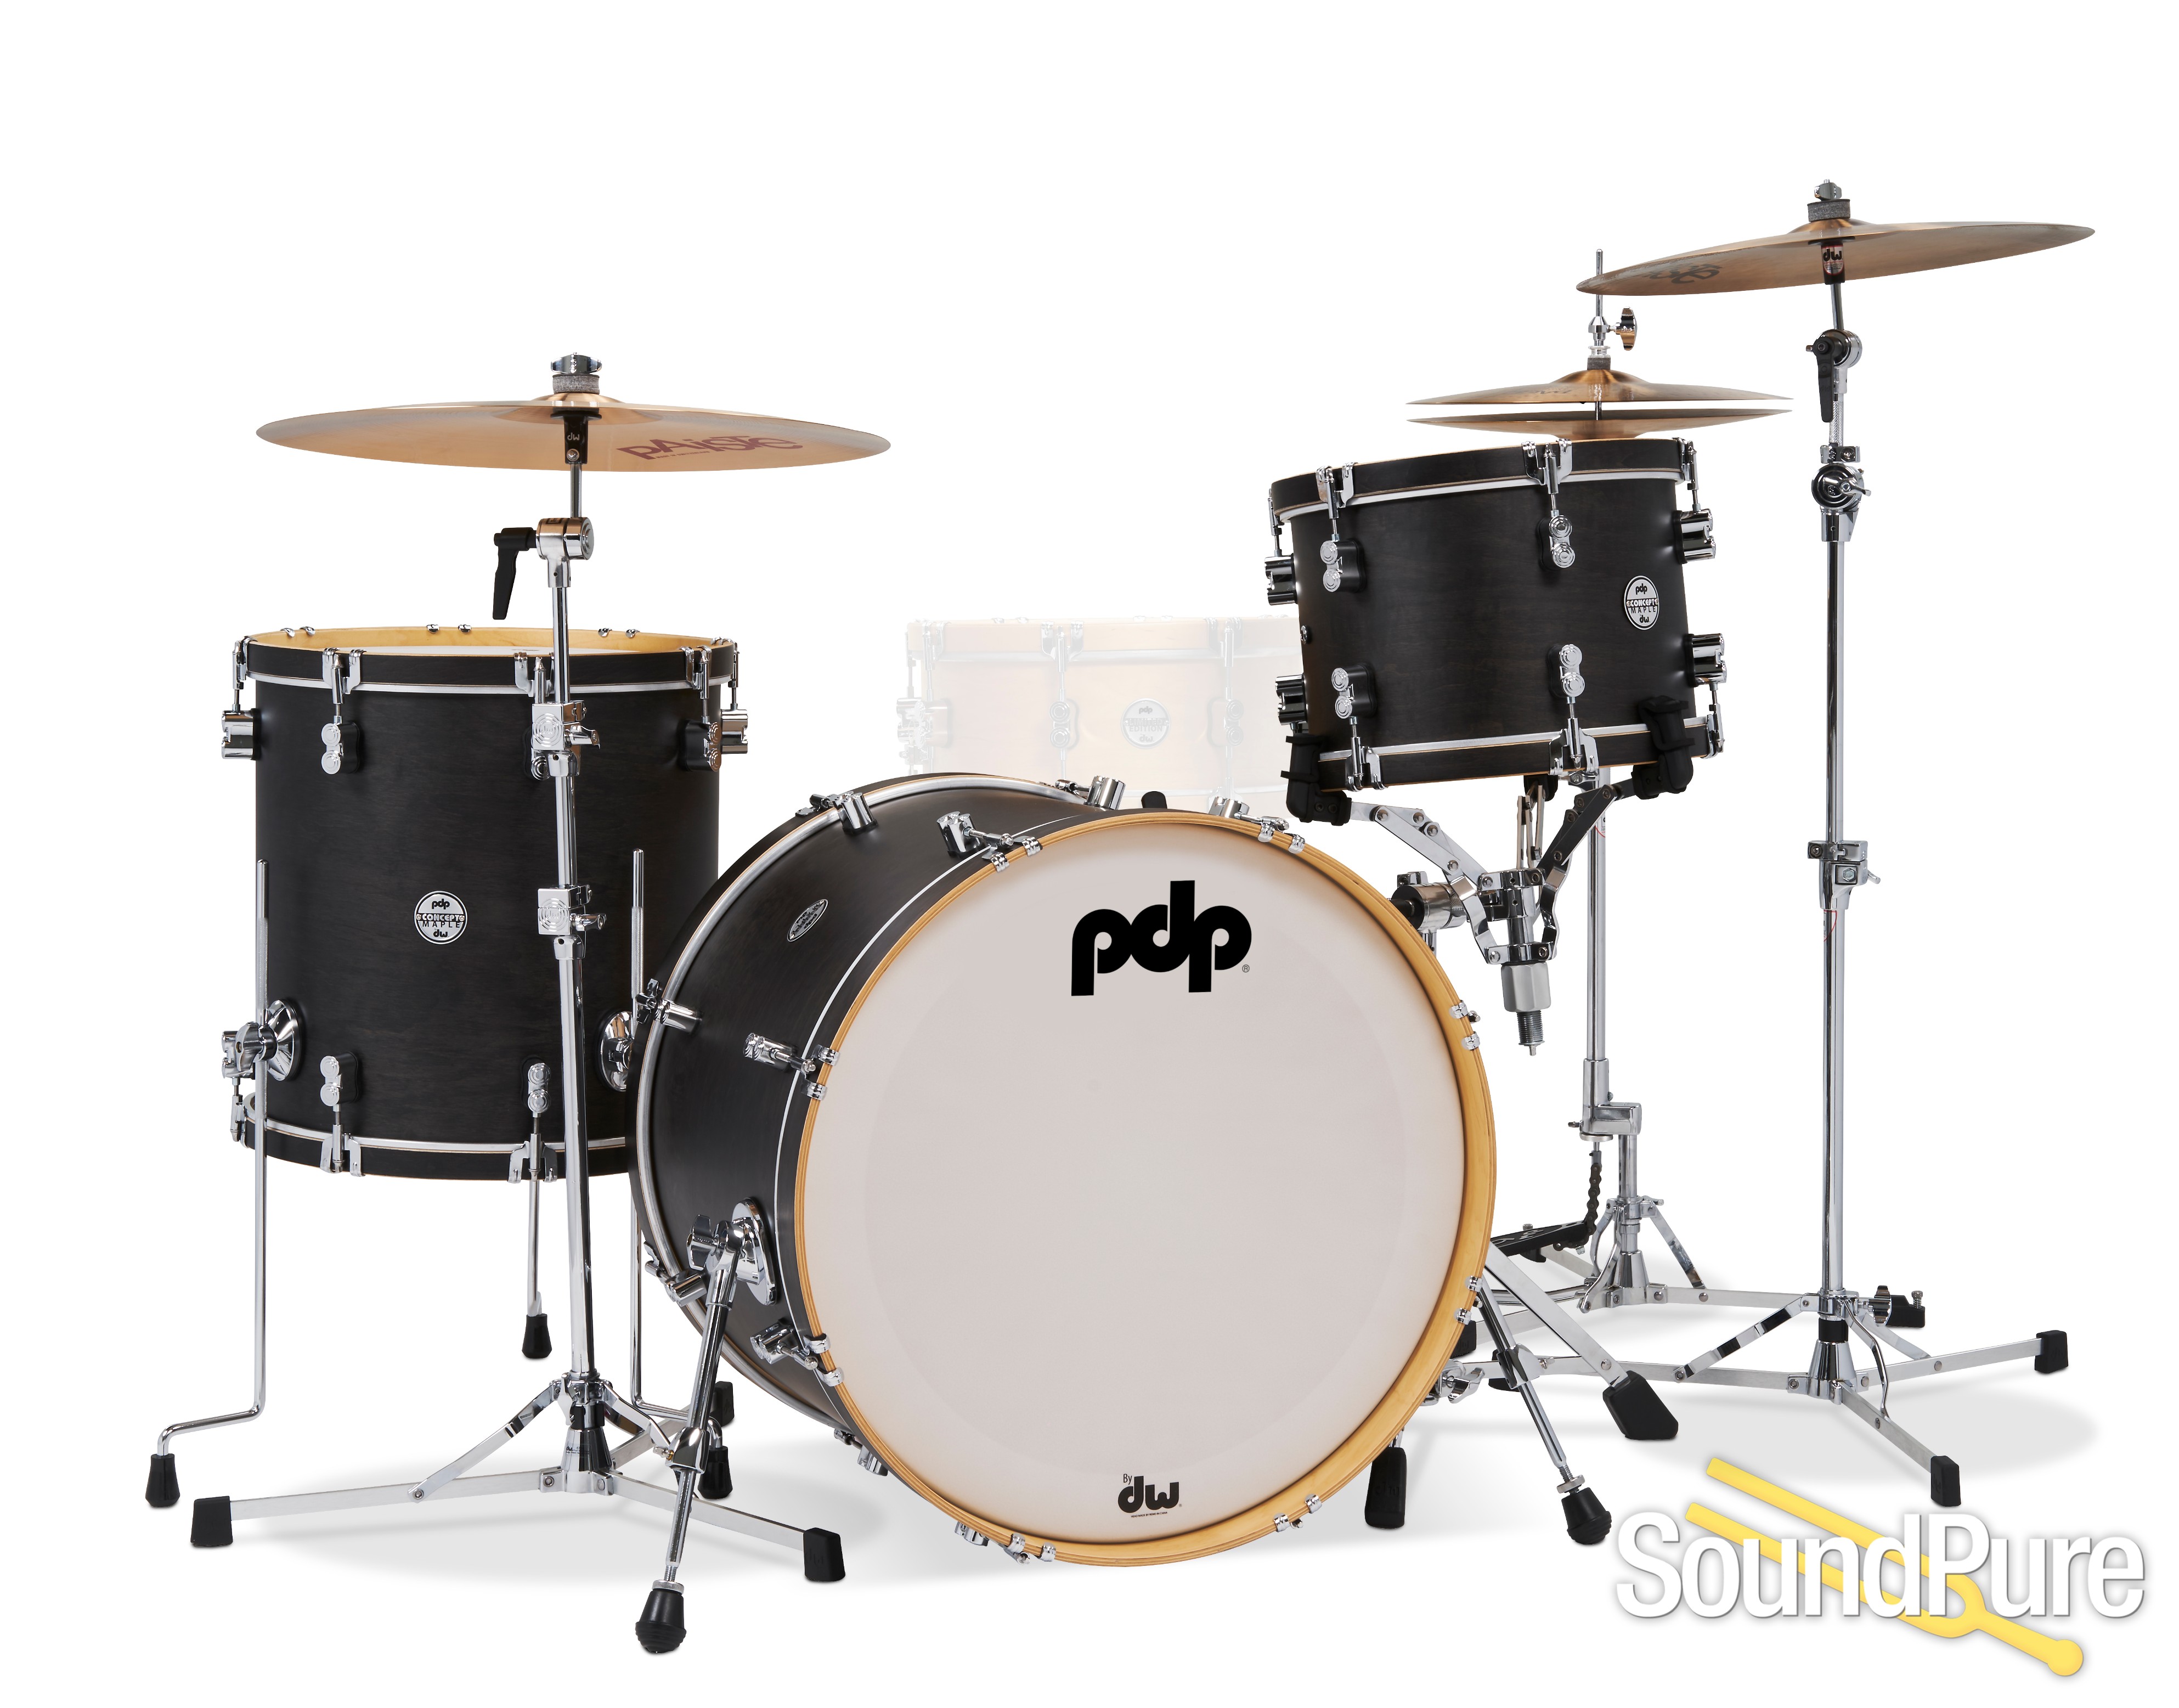 PDP Concept Maple Classic Snare Drum 6.5x14 Ebony with Ebony Hoops 